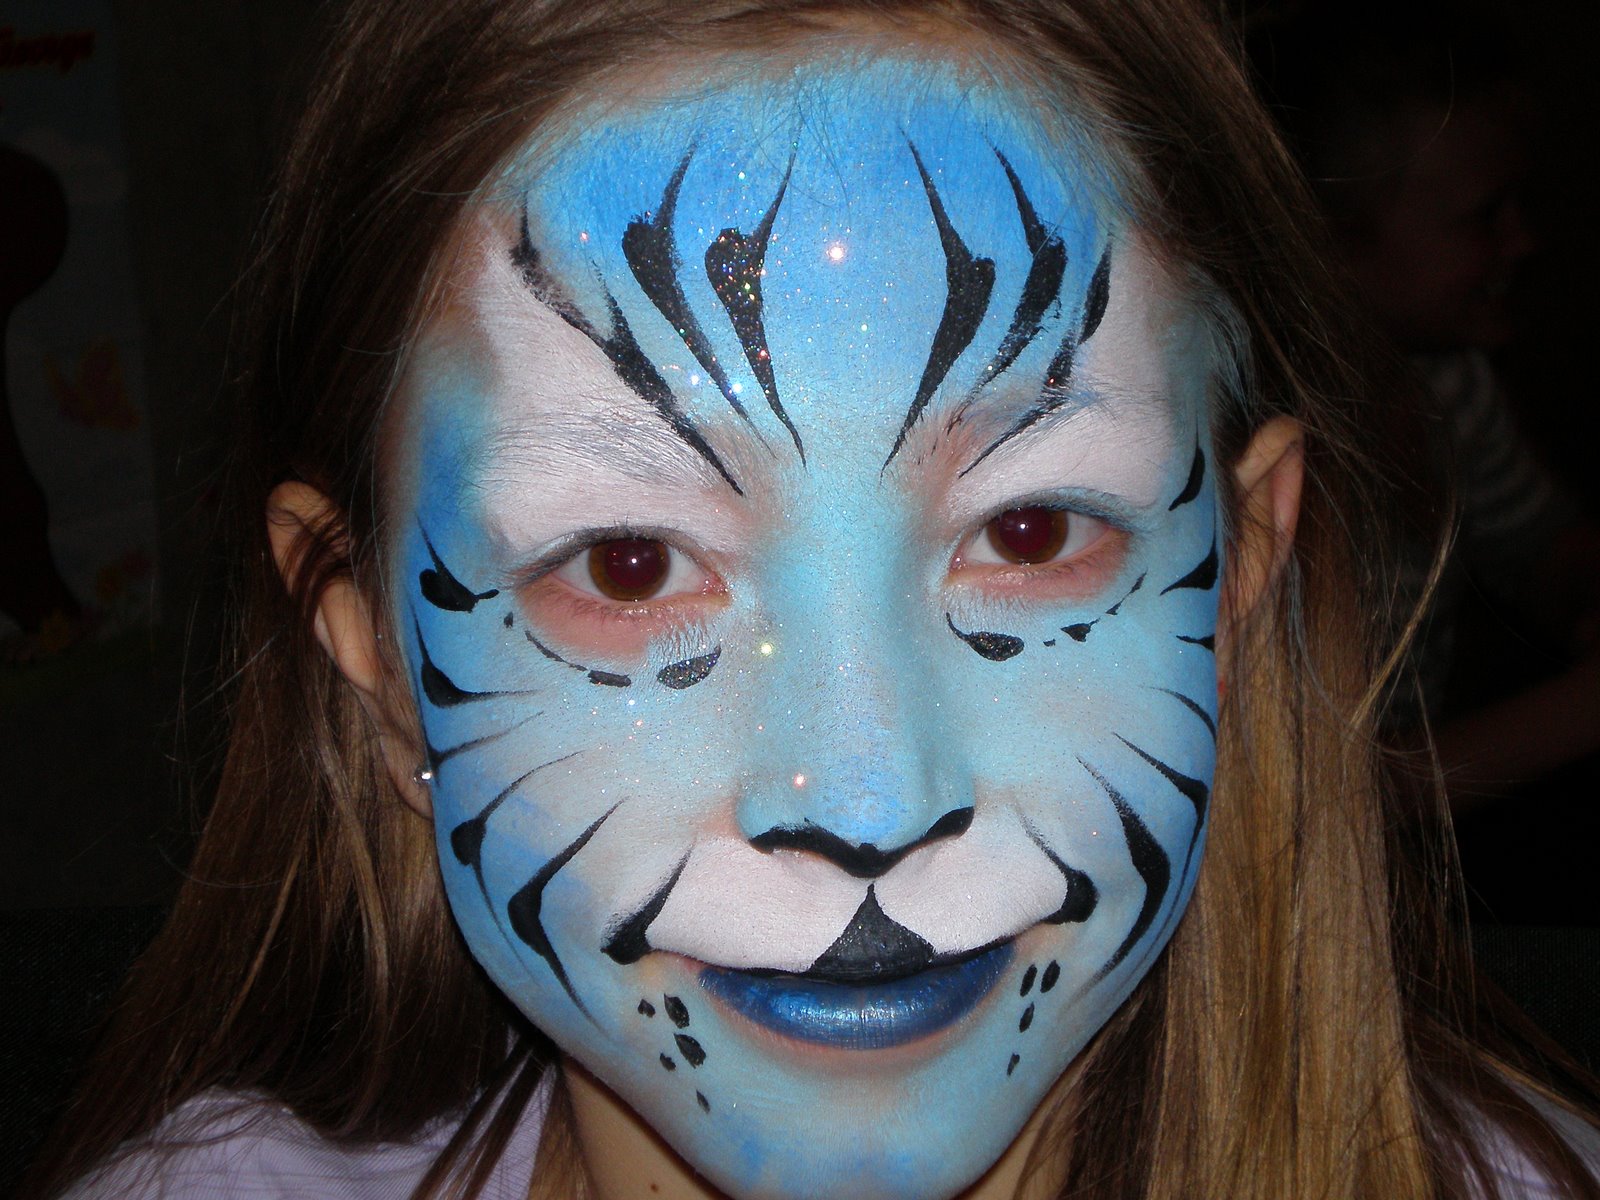 [oddzinends_balloon_and_face_painting_006.jpg]